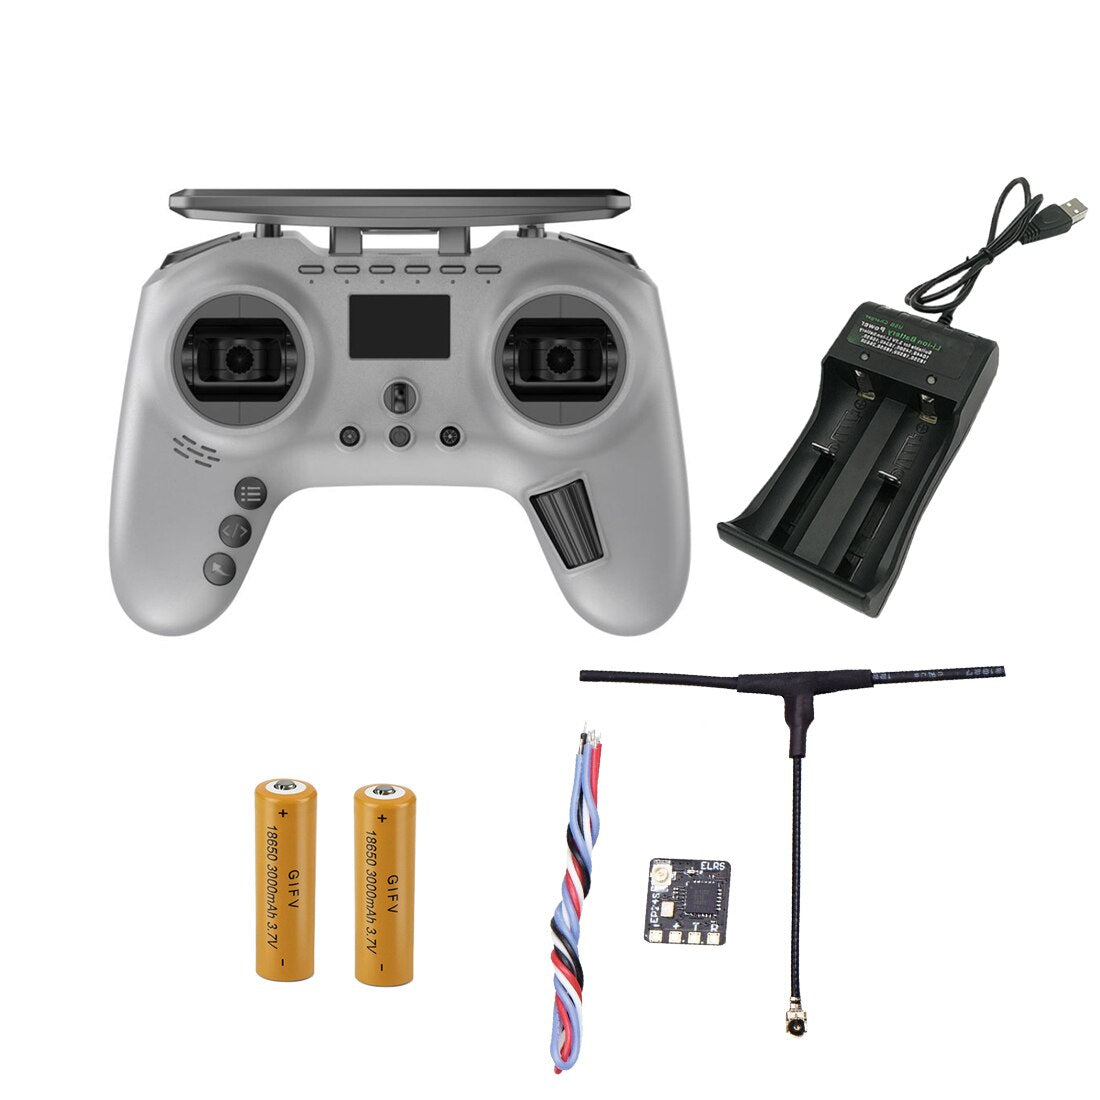 Jumper T-Pro internal ELRS 2.4Ghz 1000mW + EP24S receiver + 2x 18650 Batteries + Charger